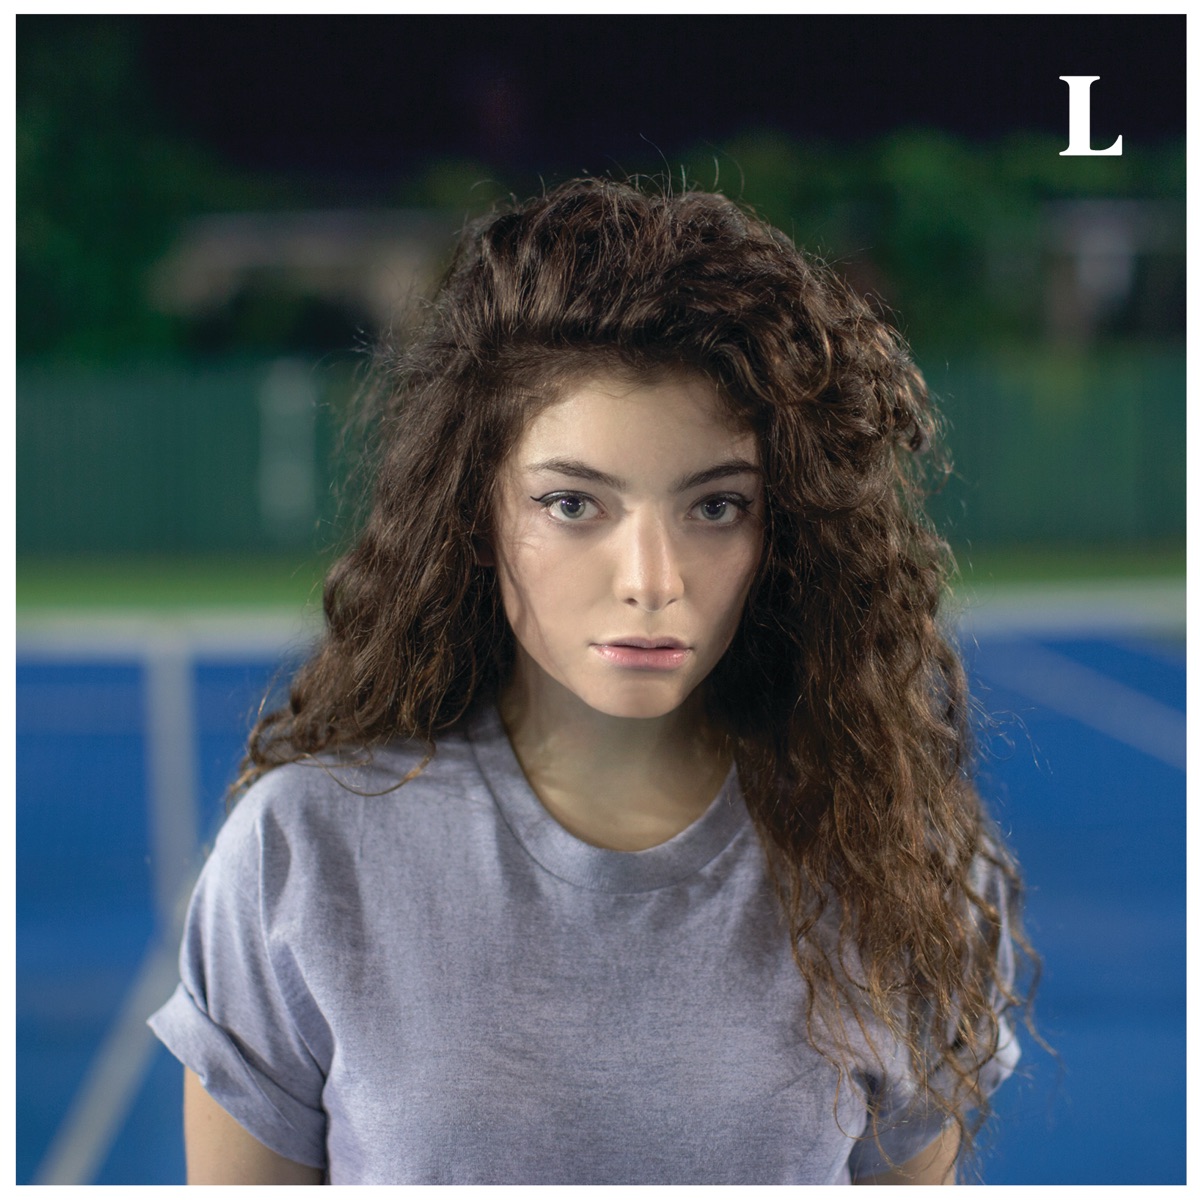 The Love Club EP by Lorde on Apple Music